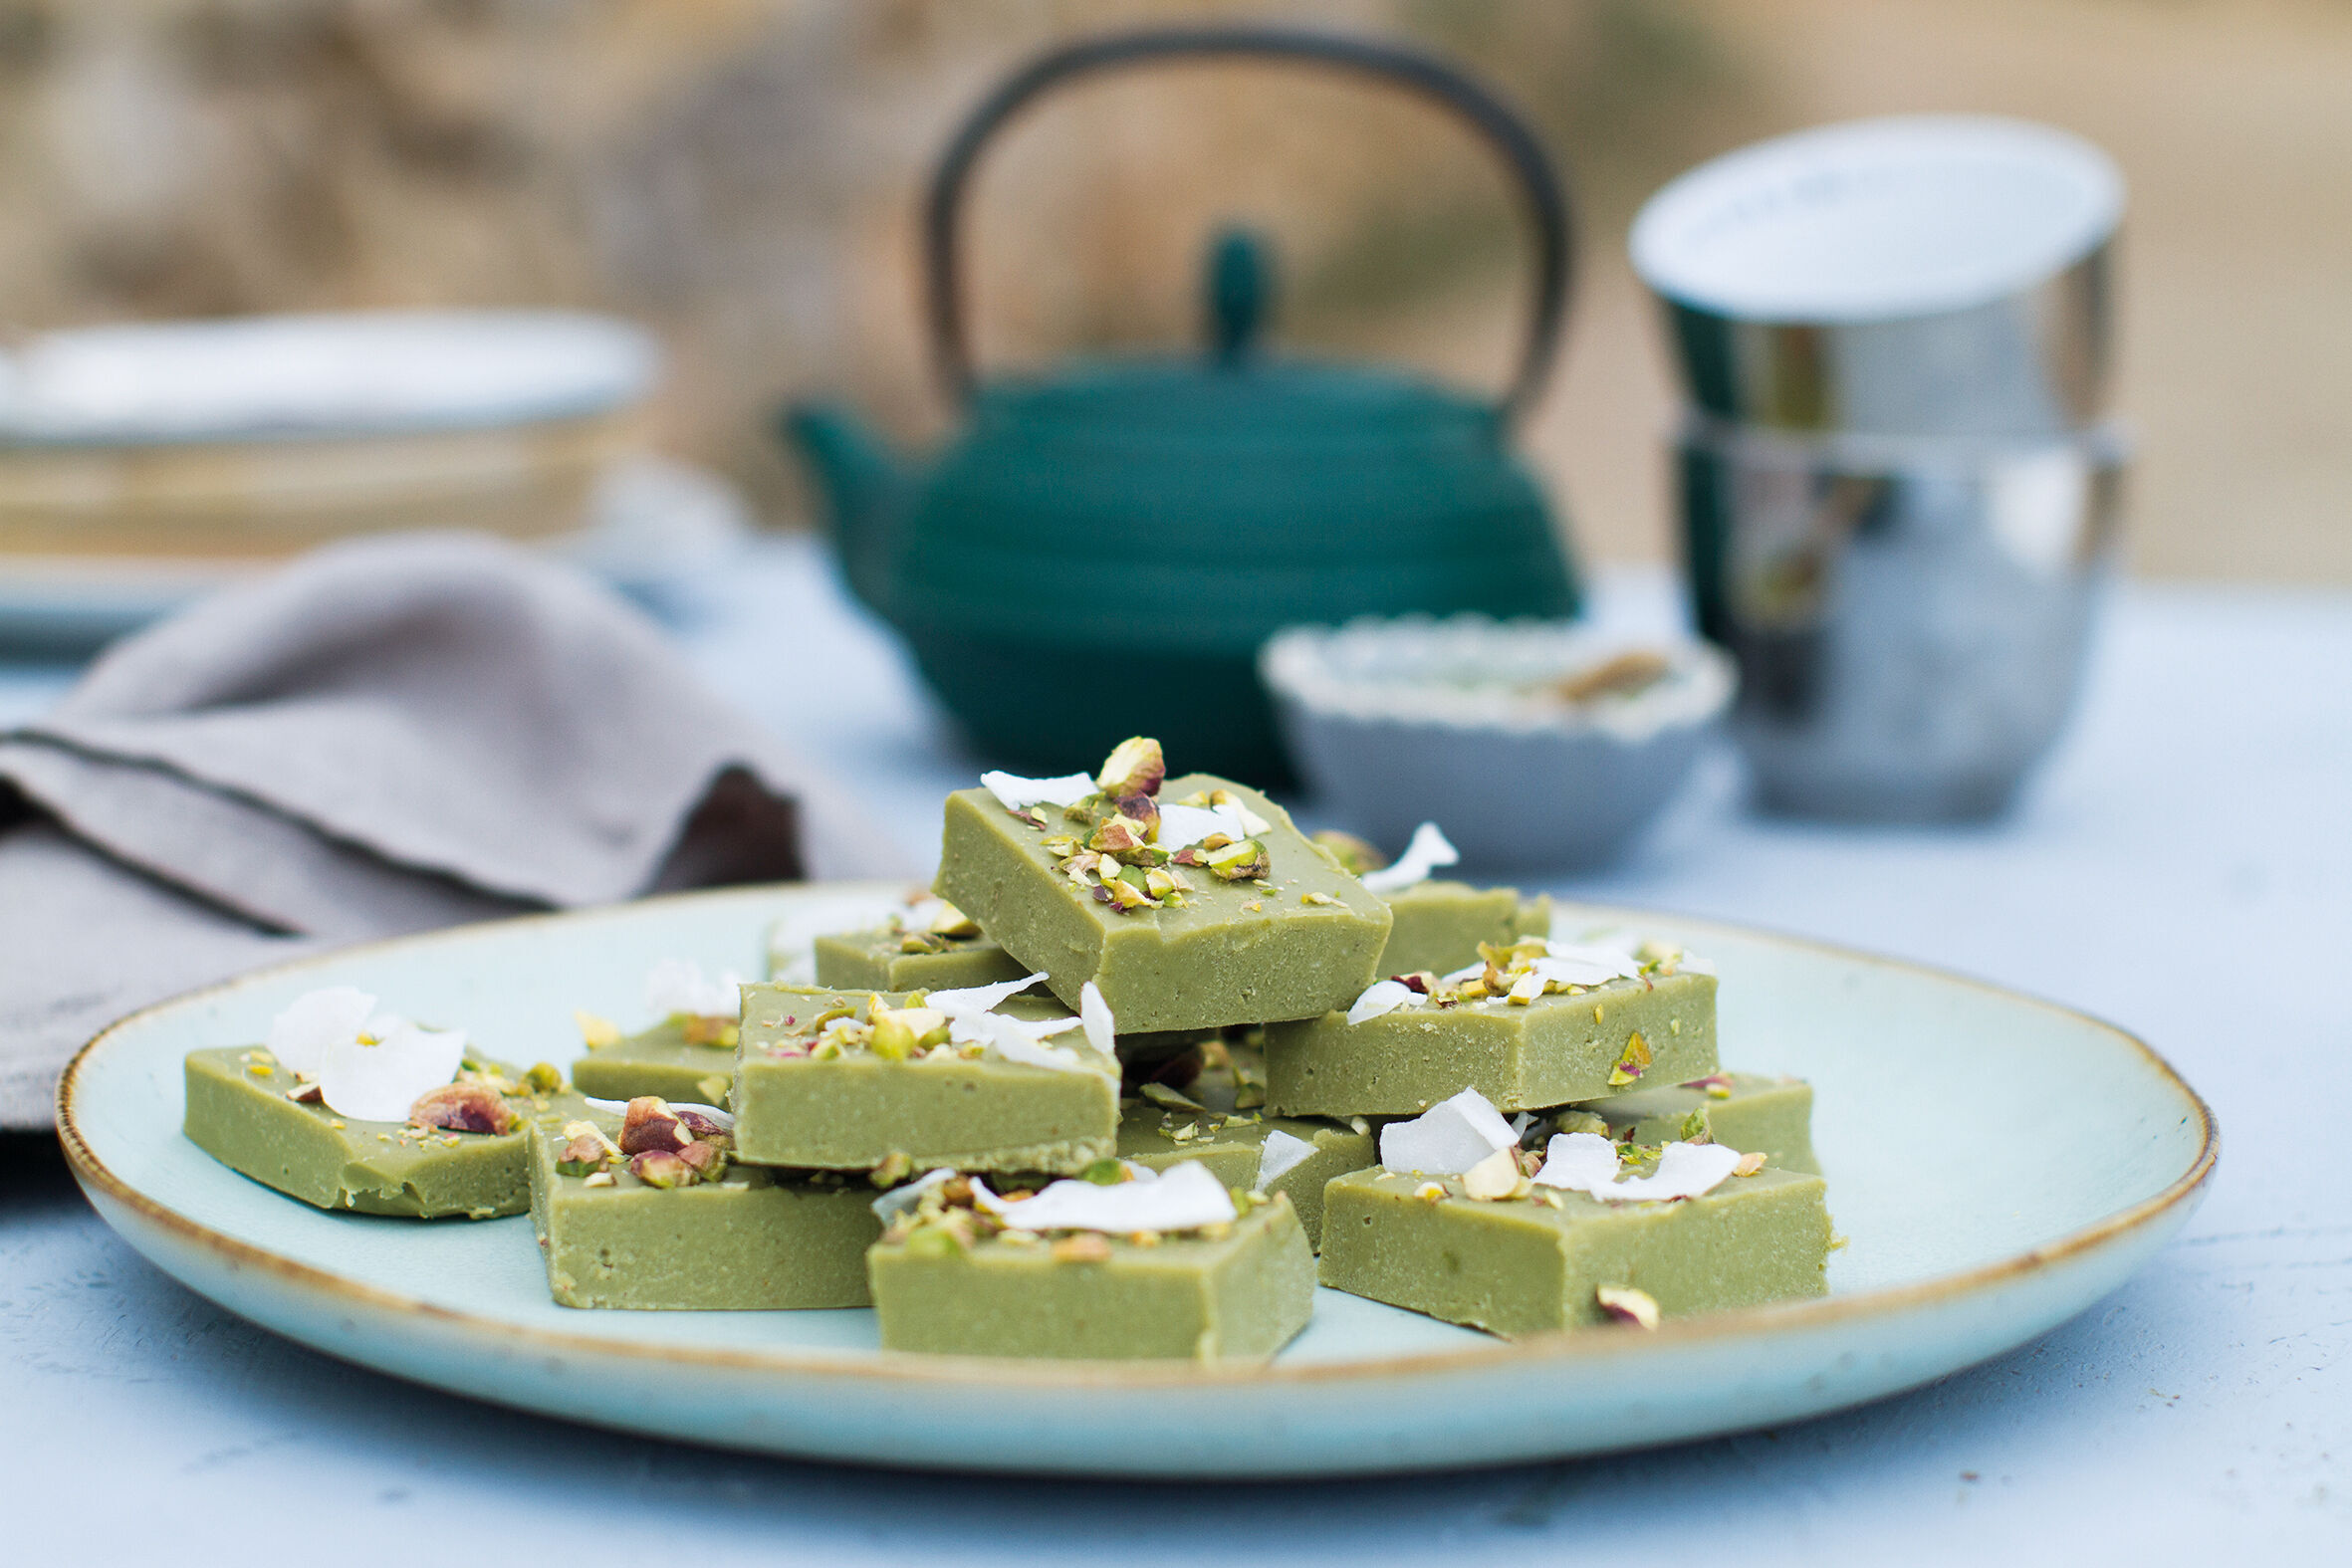 Sweet matcha recipes to treat your soul